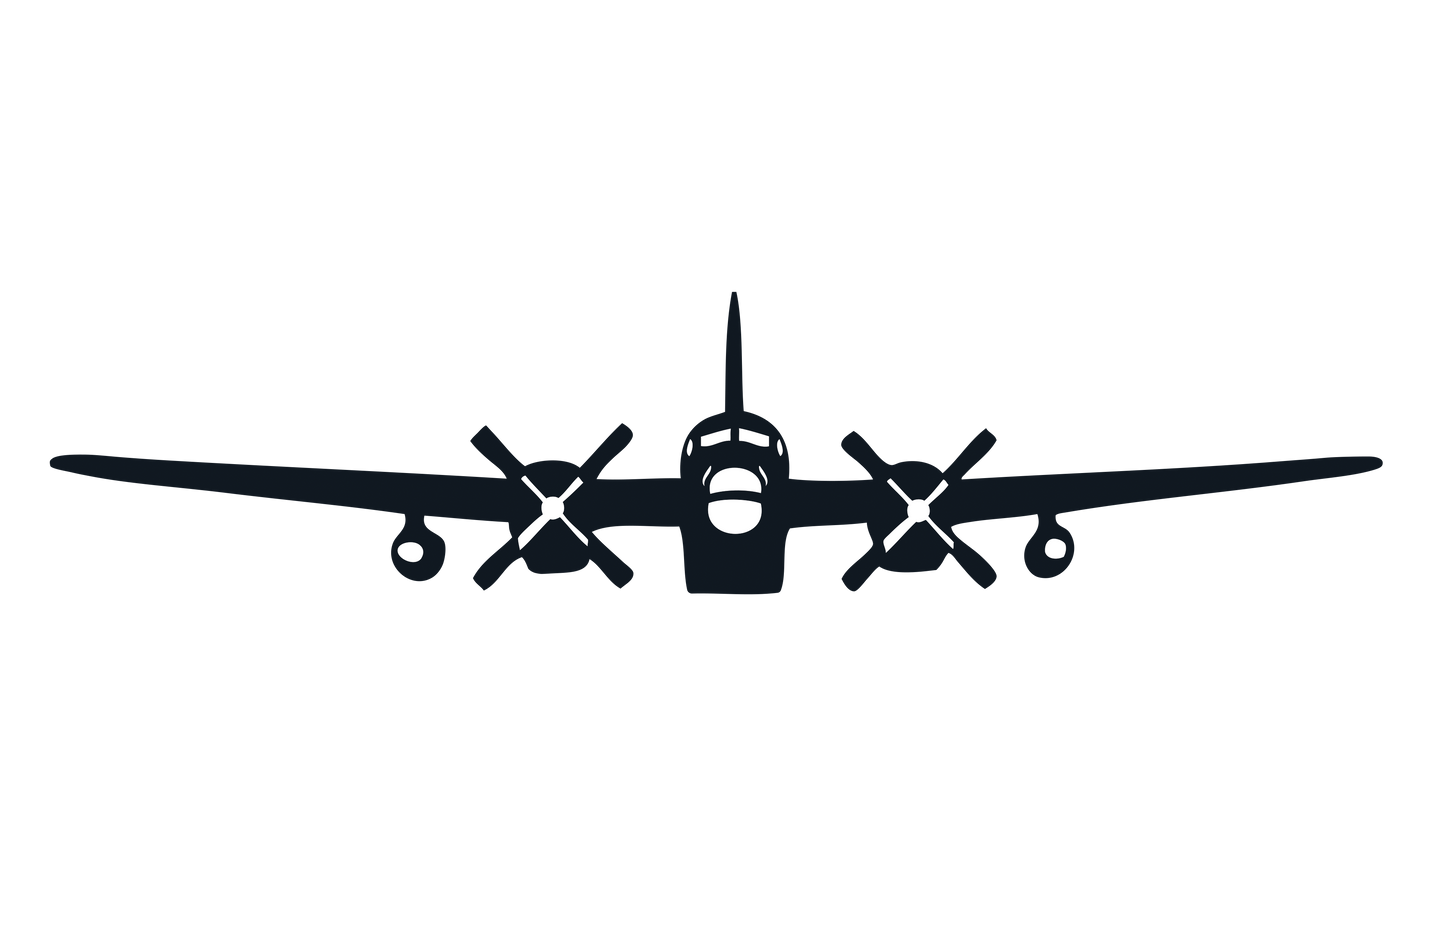 P2V Silhouette Decal 8"